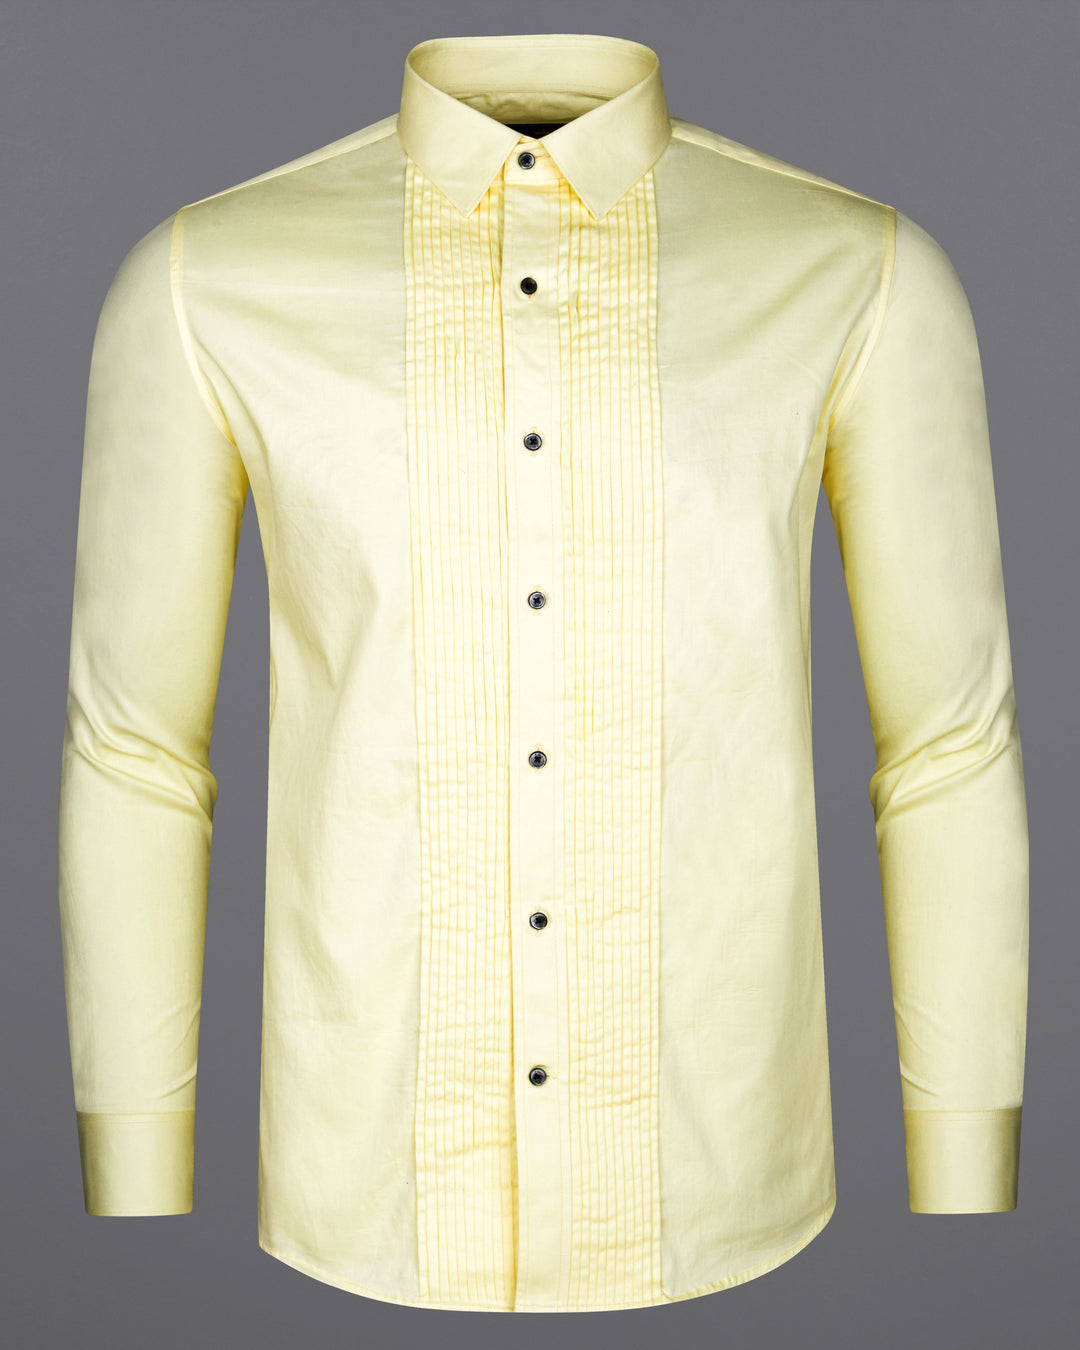 Mustard Blazer with White Pants Outfits For Men (23 ideas & outfits) |  Lookastic